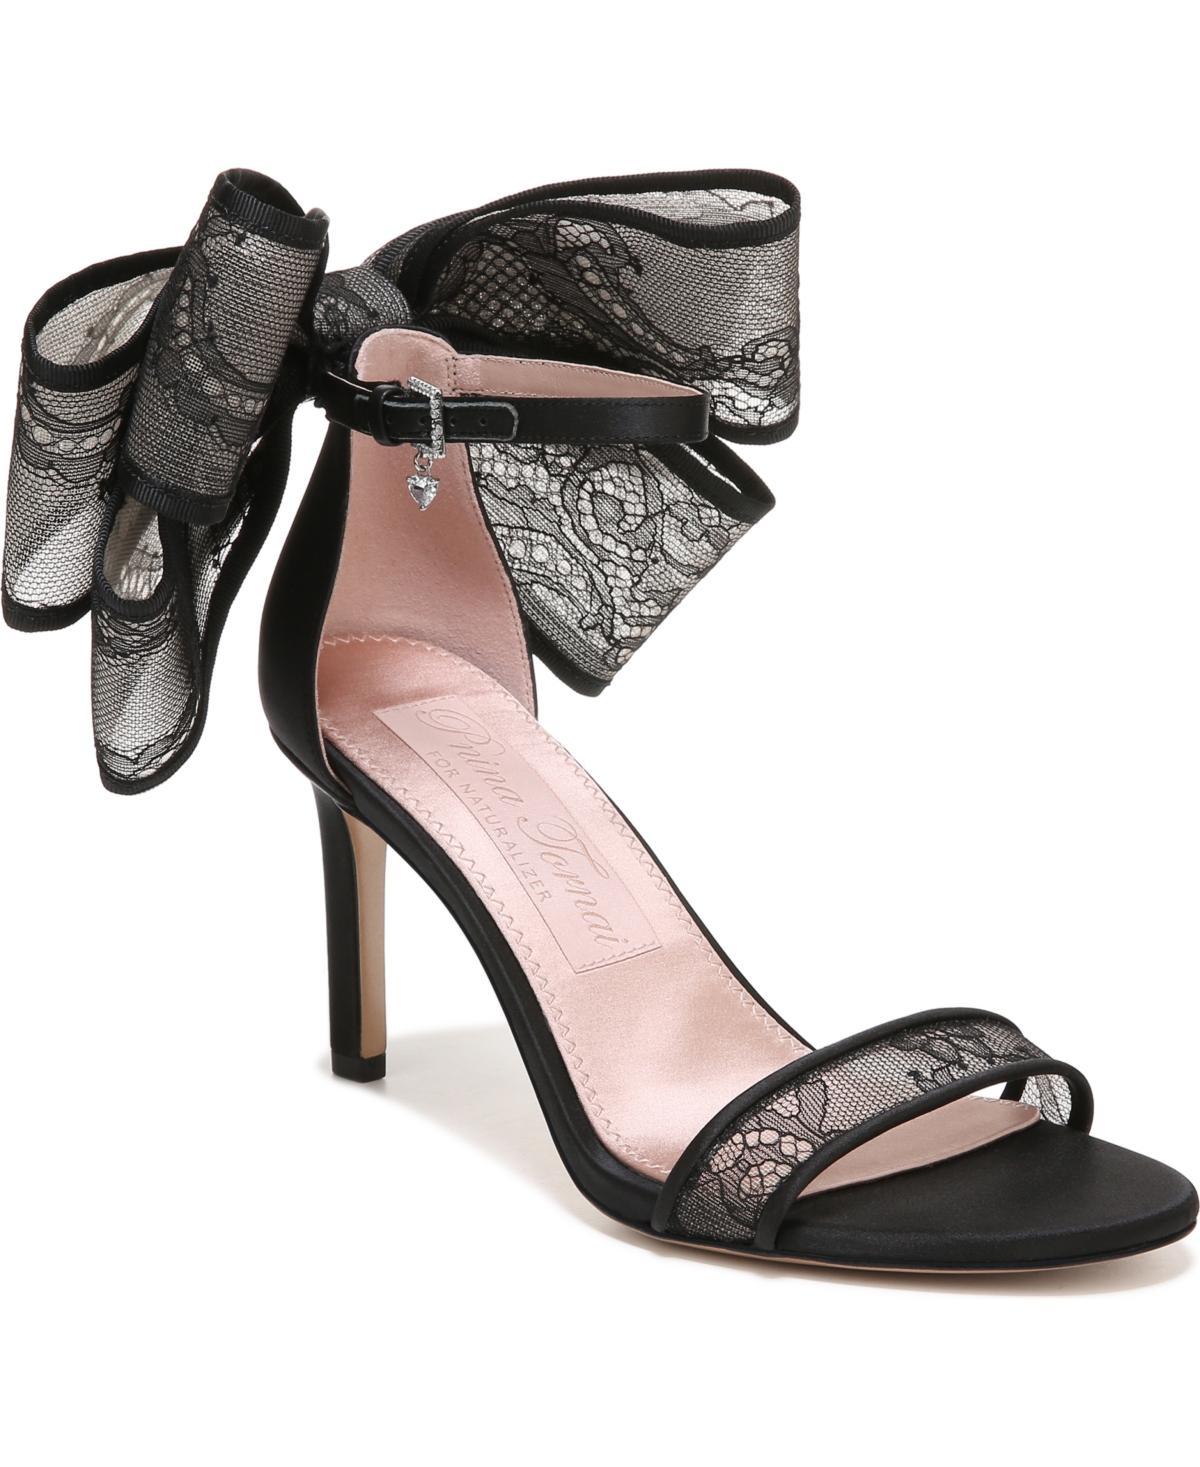 Pnina Tornai for Naturalizer Amour Ankle Strap Sandal Product Image